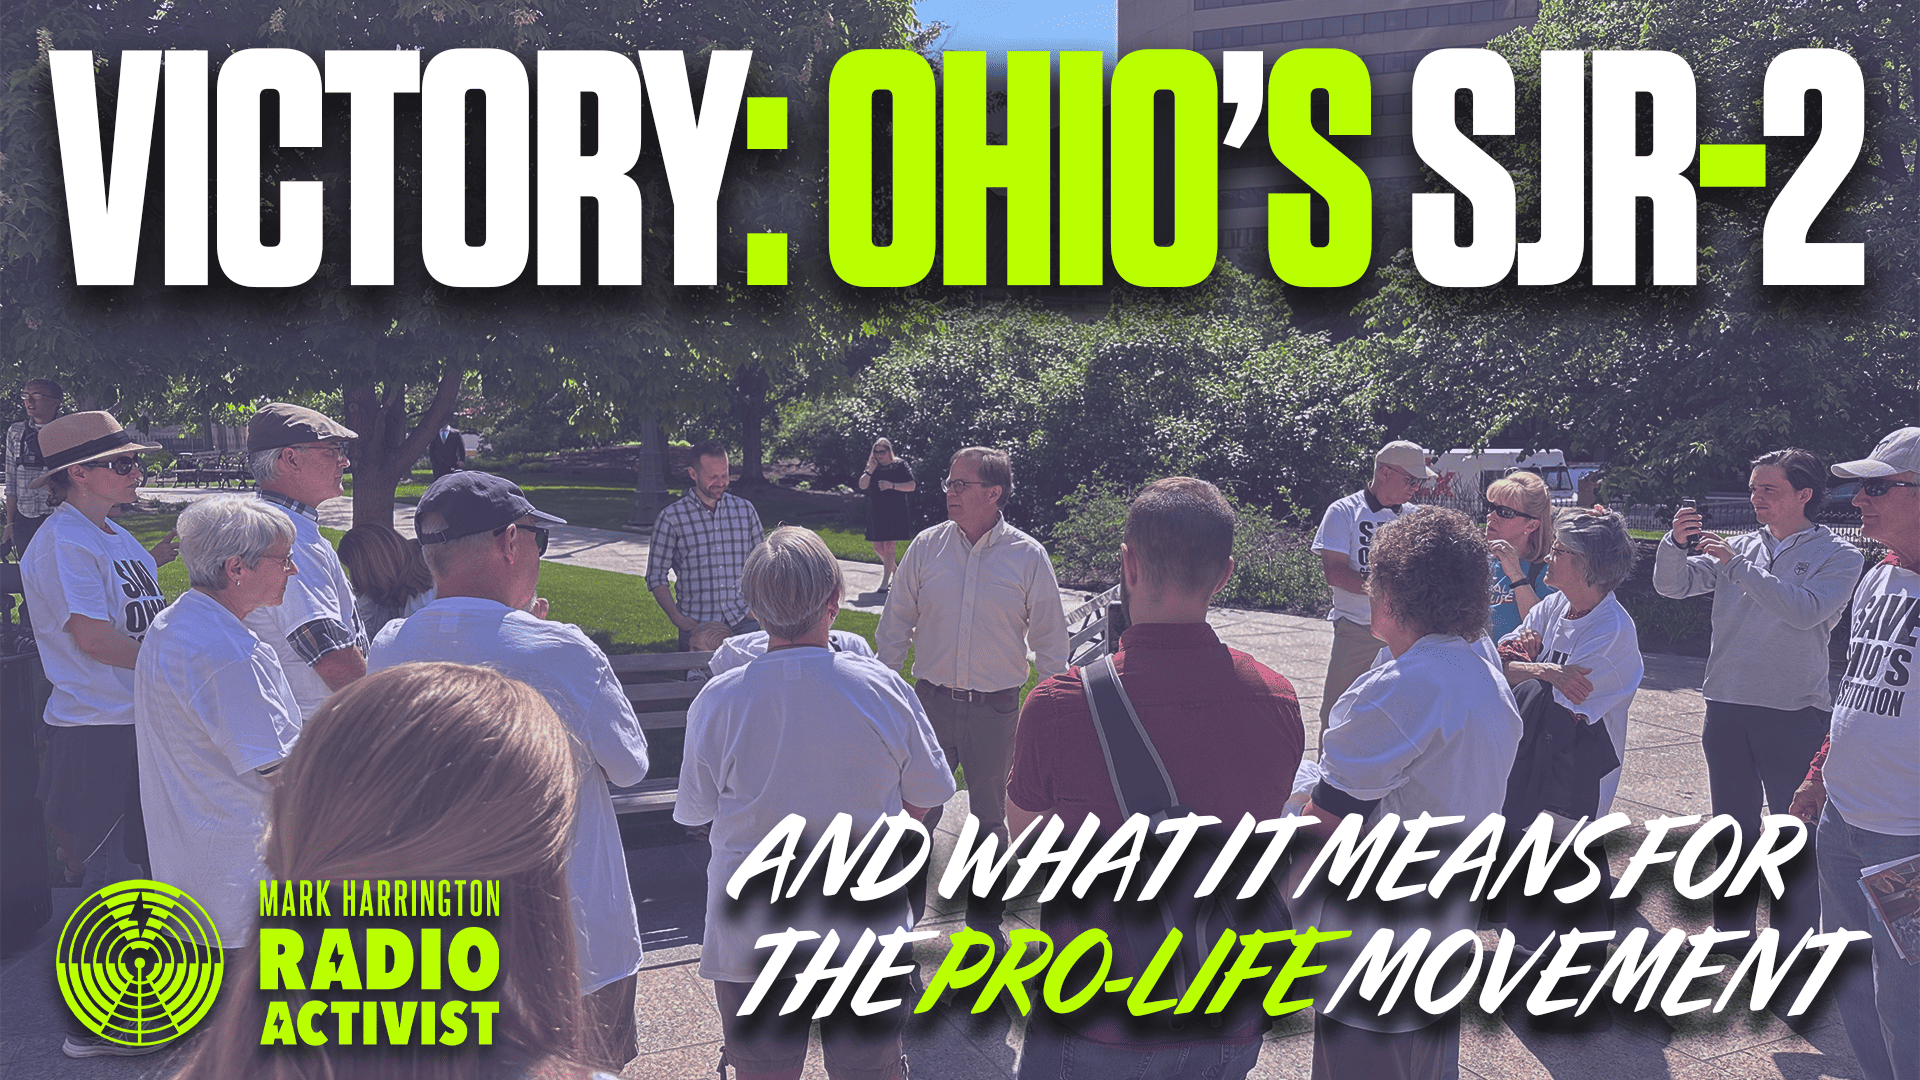 VICTORY: Protecting Ohio’s Constitution